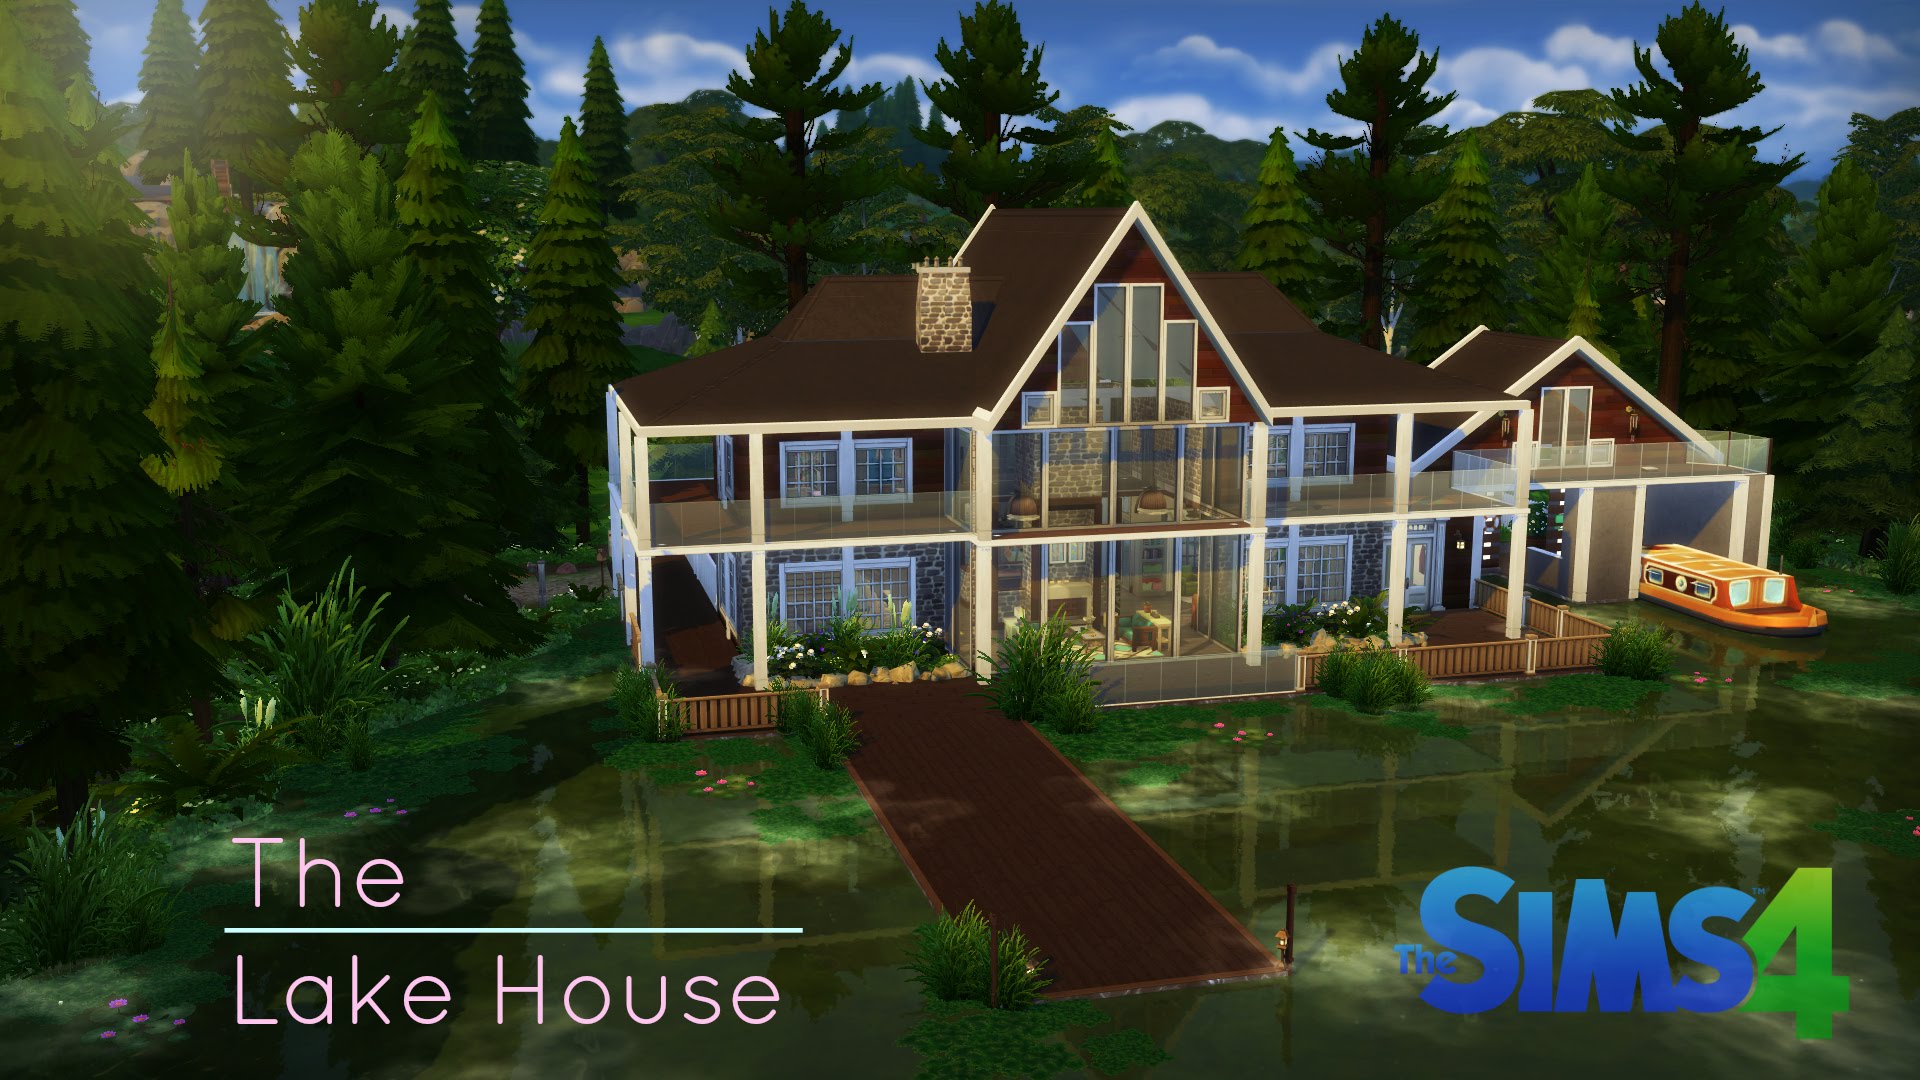 The Lake House | The Sims 4 Speed Build - YouTube